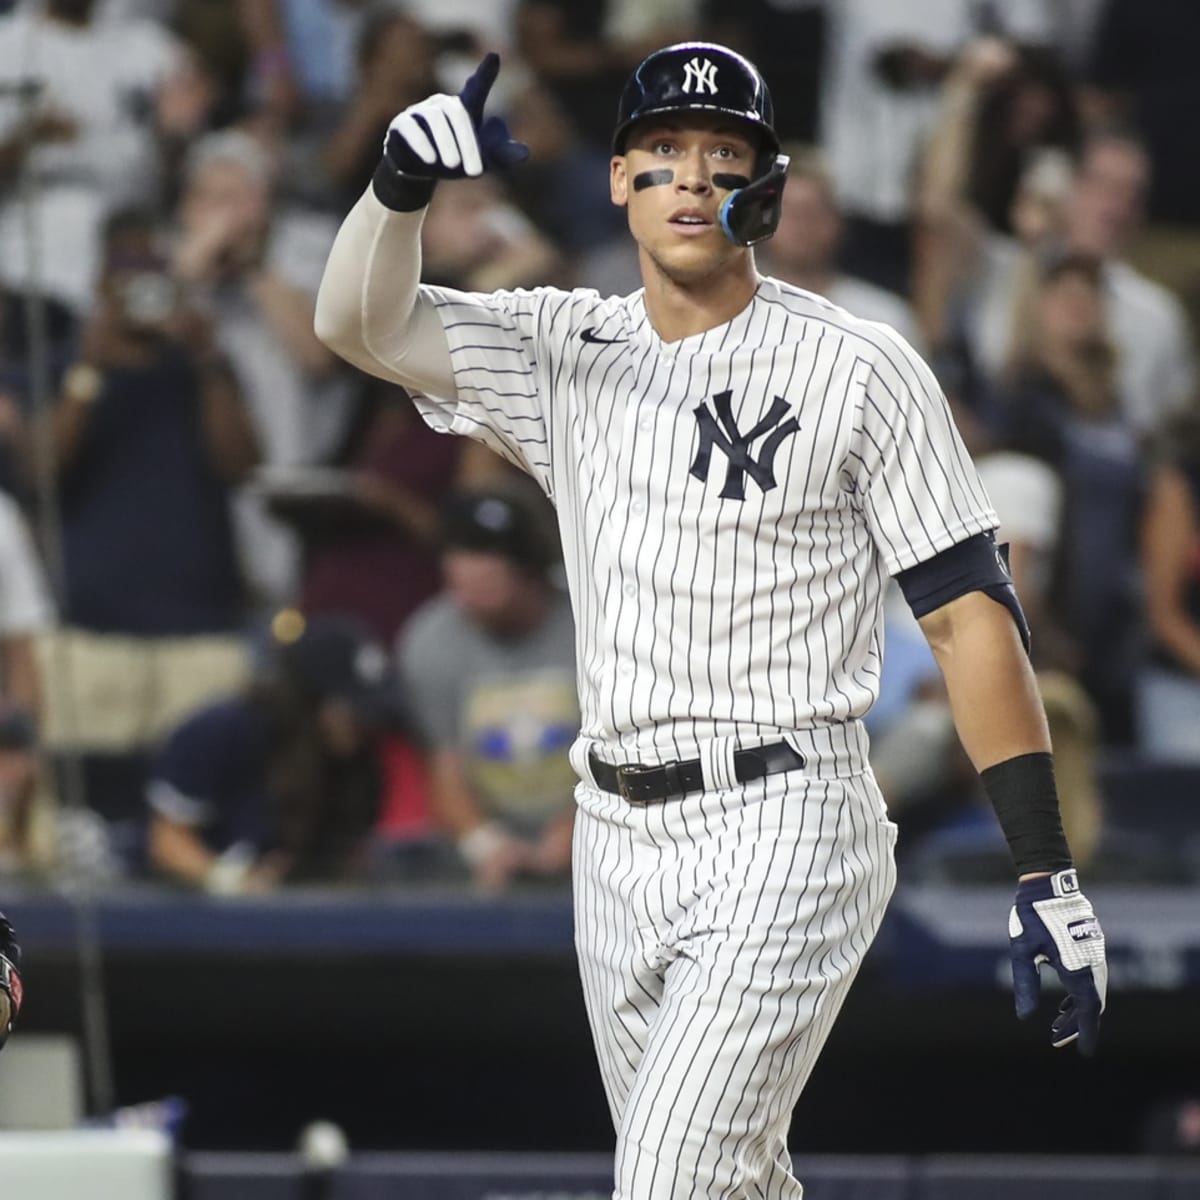 SF Giants announcer says there's “tension” between Aaron Judge and Yankees  - Sports Illustrated San Francisco Giants News, Analysis and More